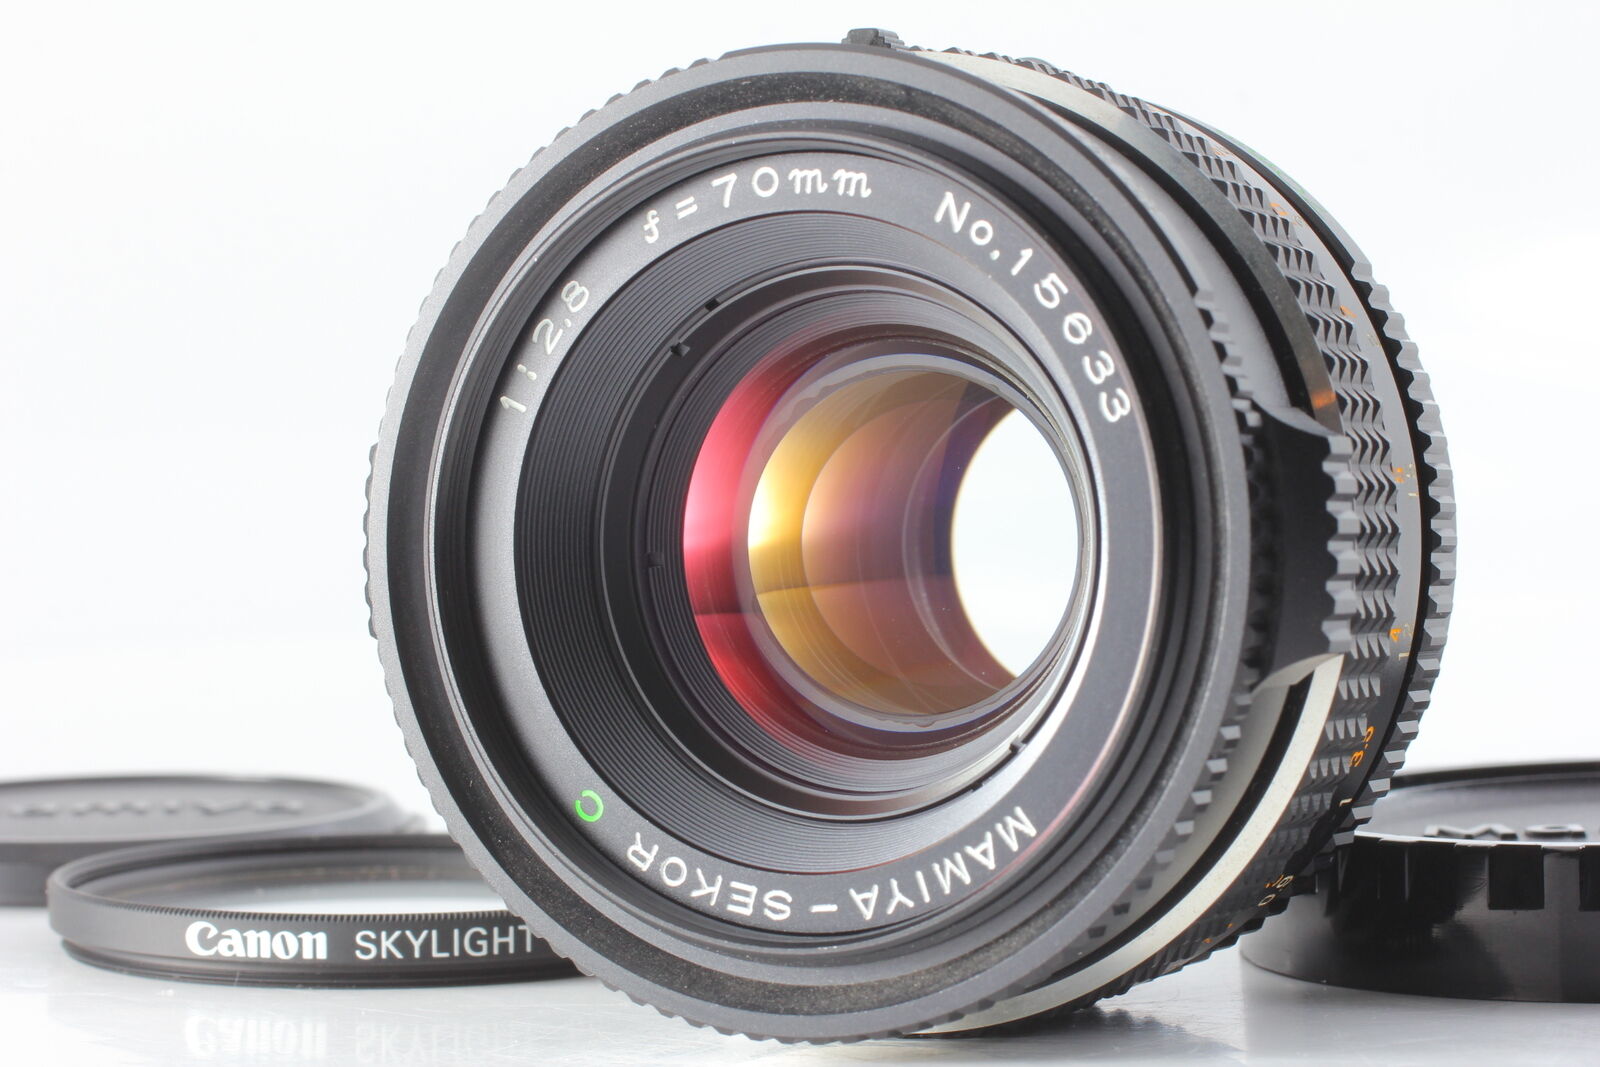 MINT] Mamiya Sekor C 70mm f2.8 Lens for M645 1000s Super Pro TL From